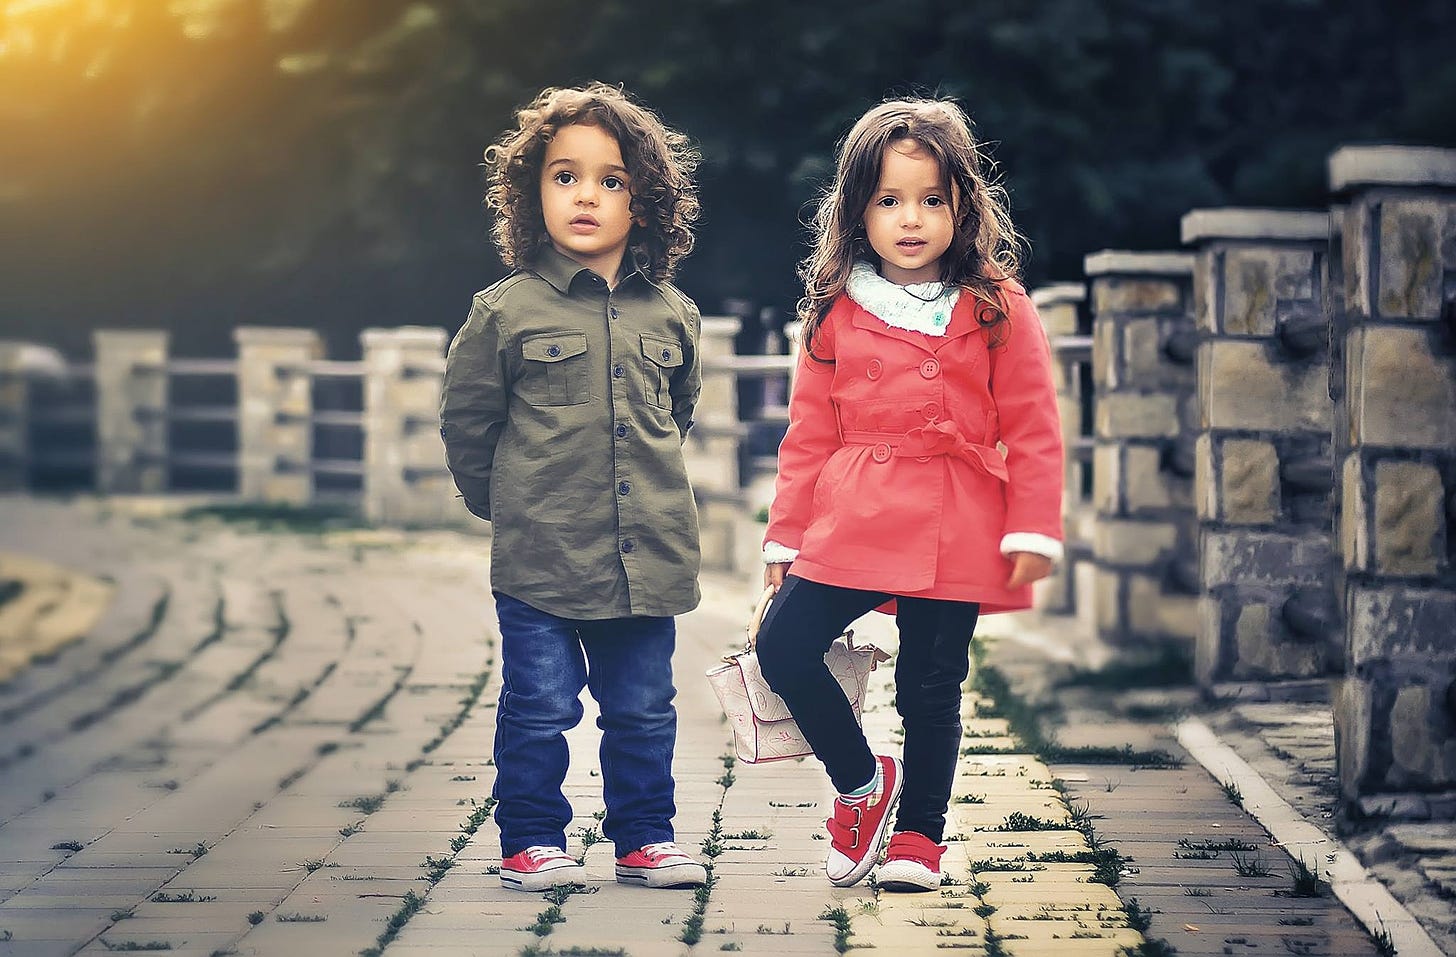 A boy and girl standing on a path.